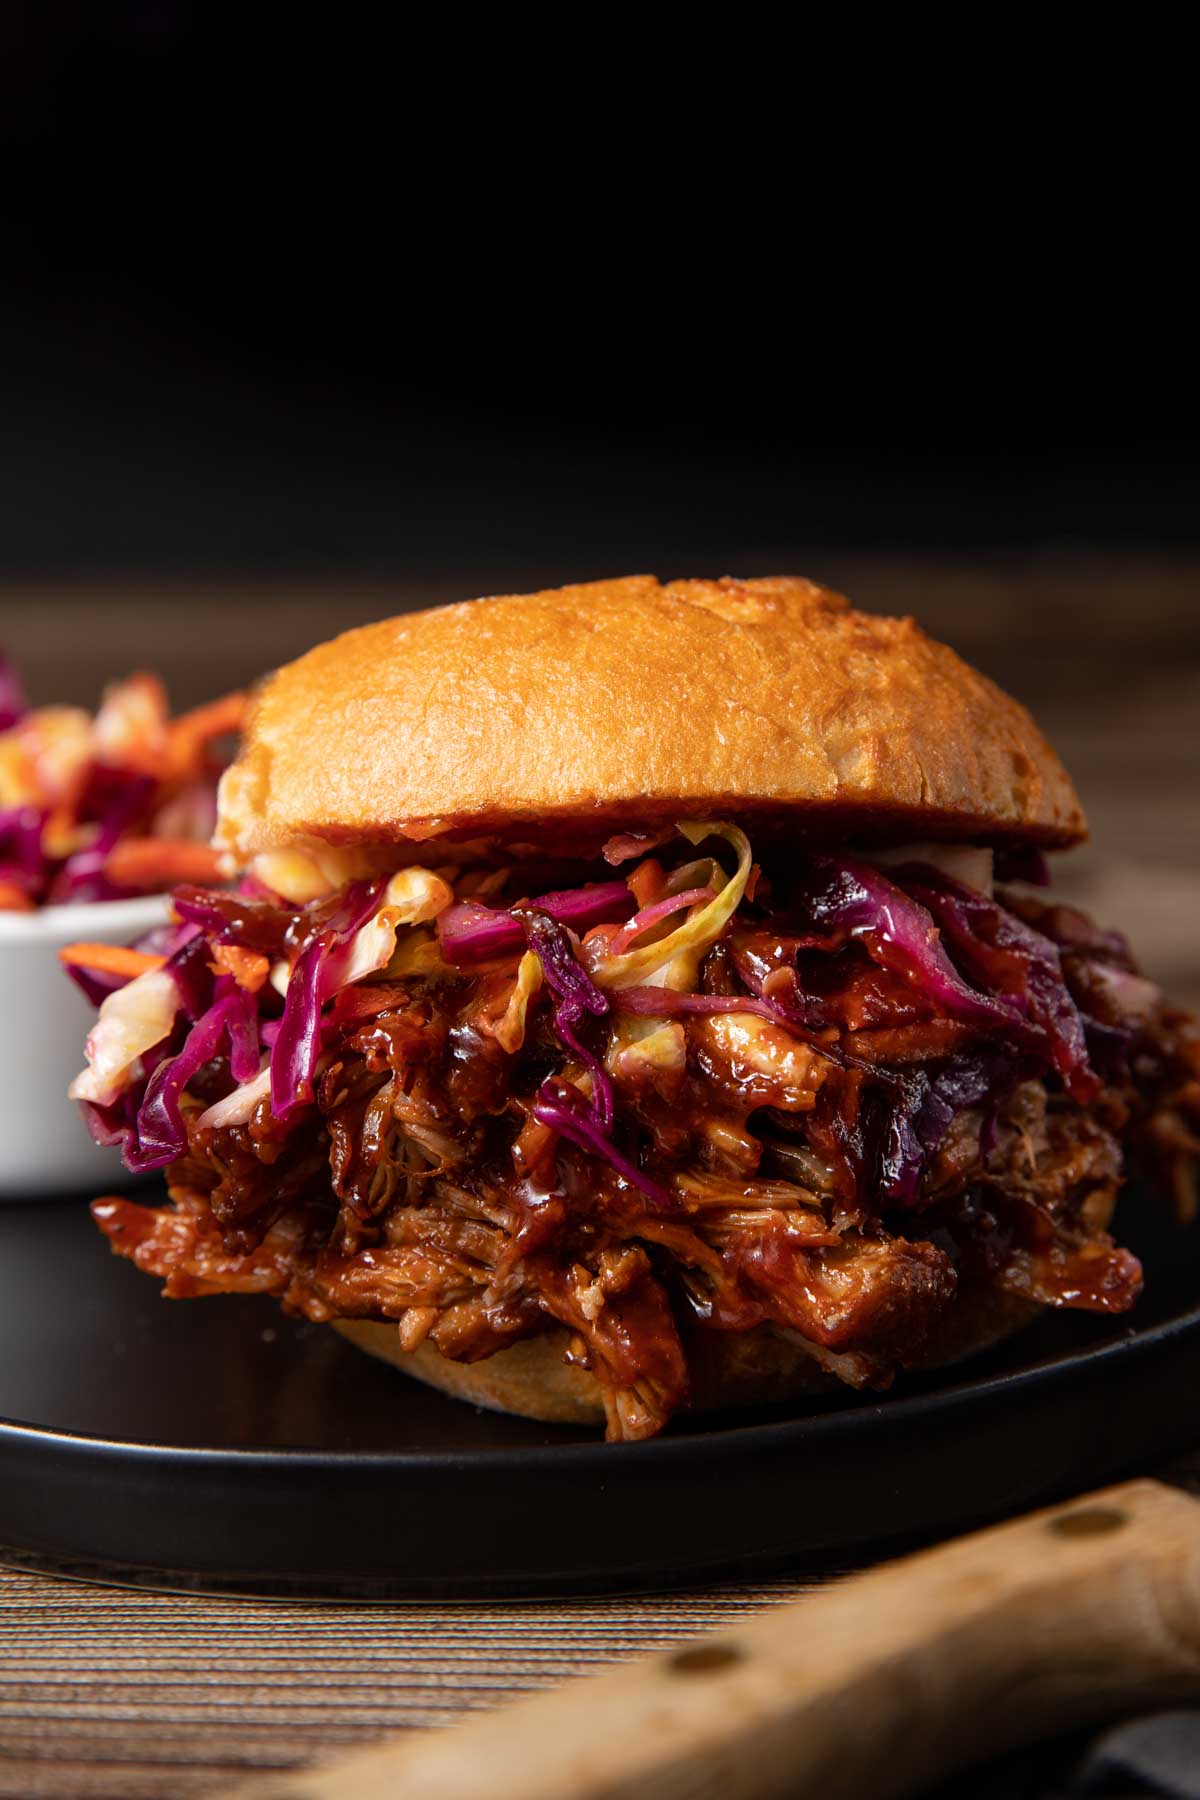 homemade pulled pork with a bun and topped with a serving of coleslaw, served on a black plate